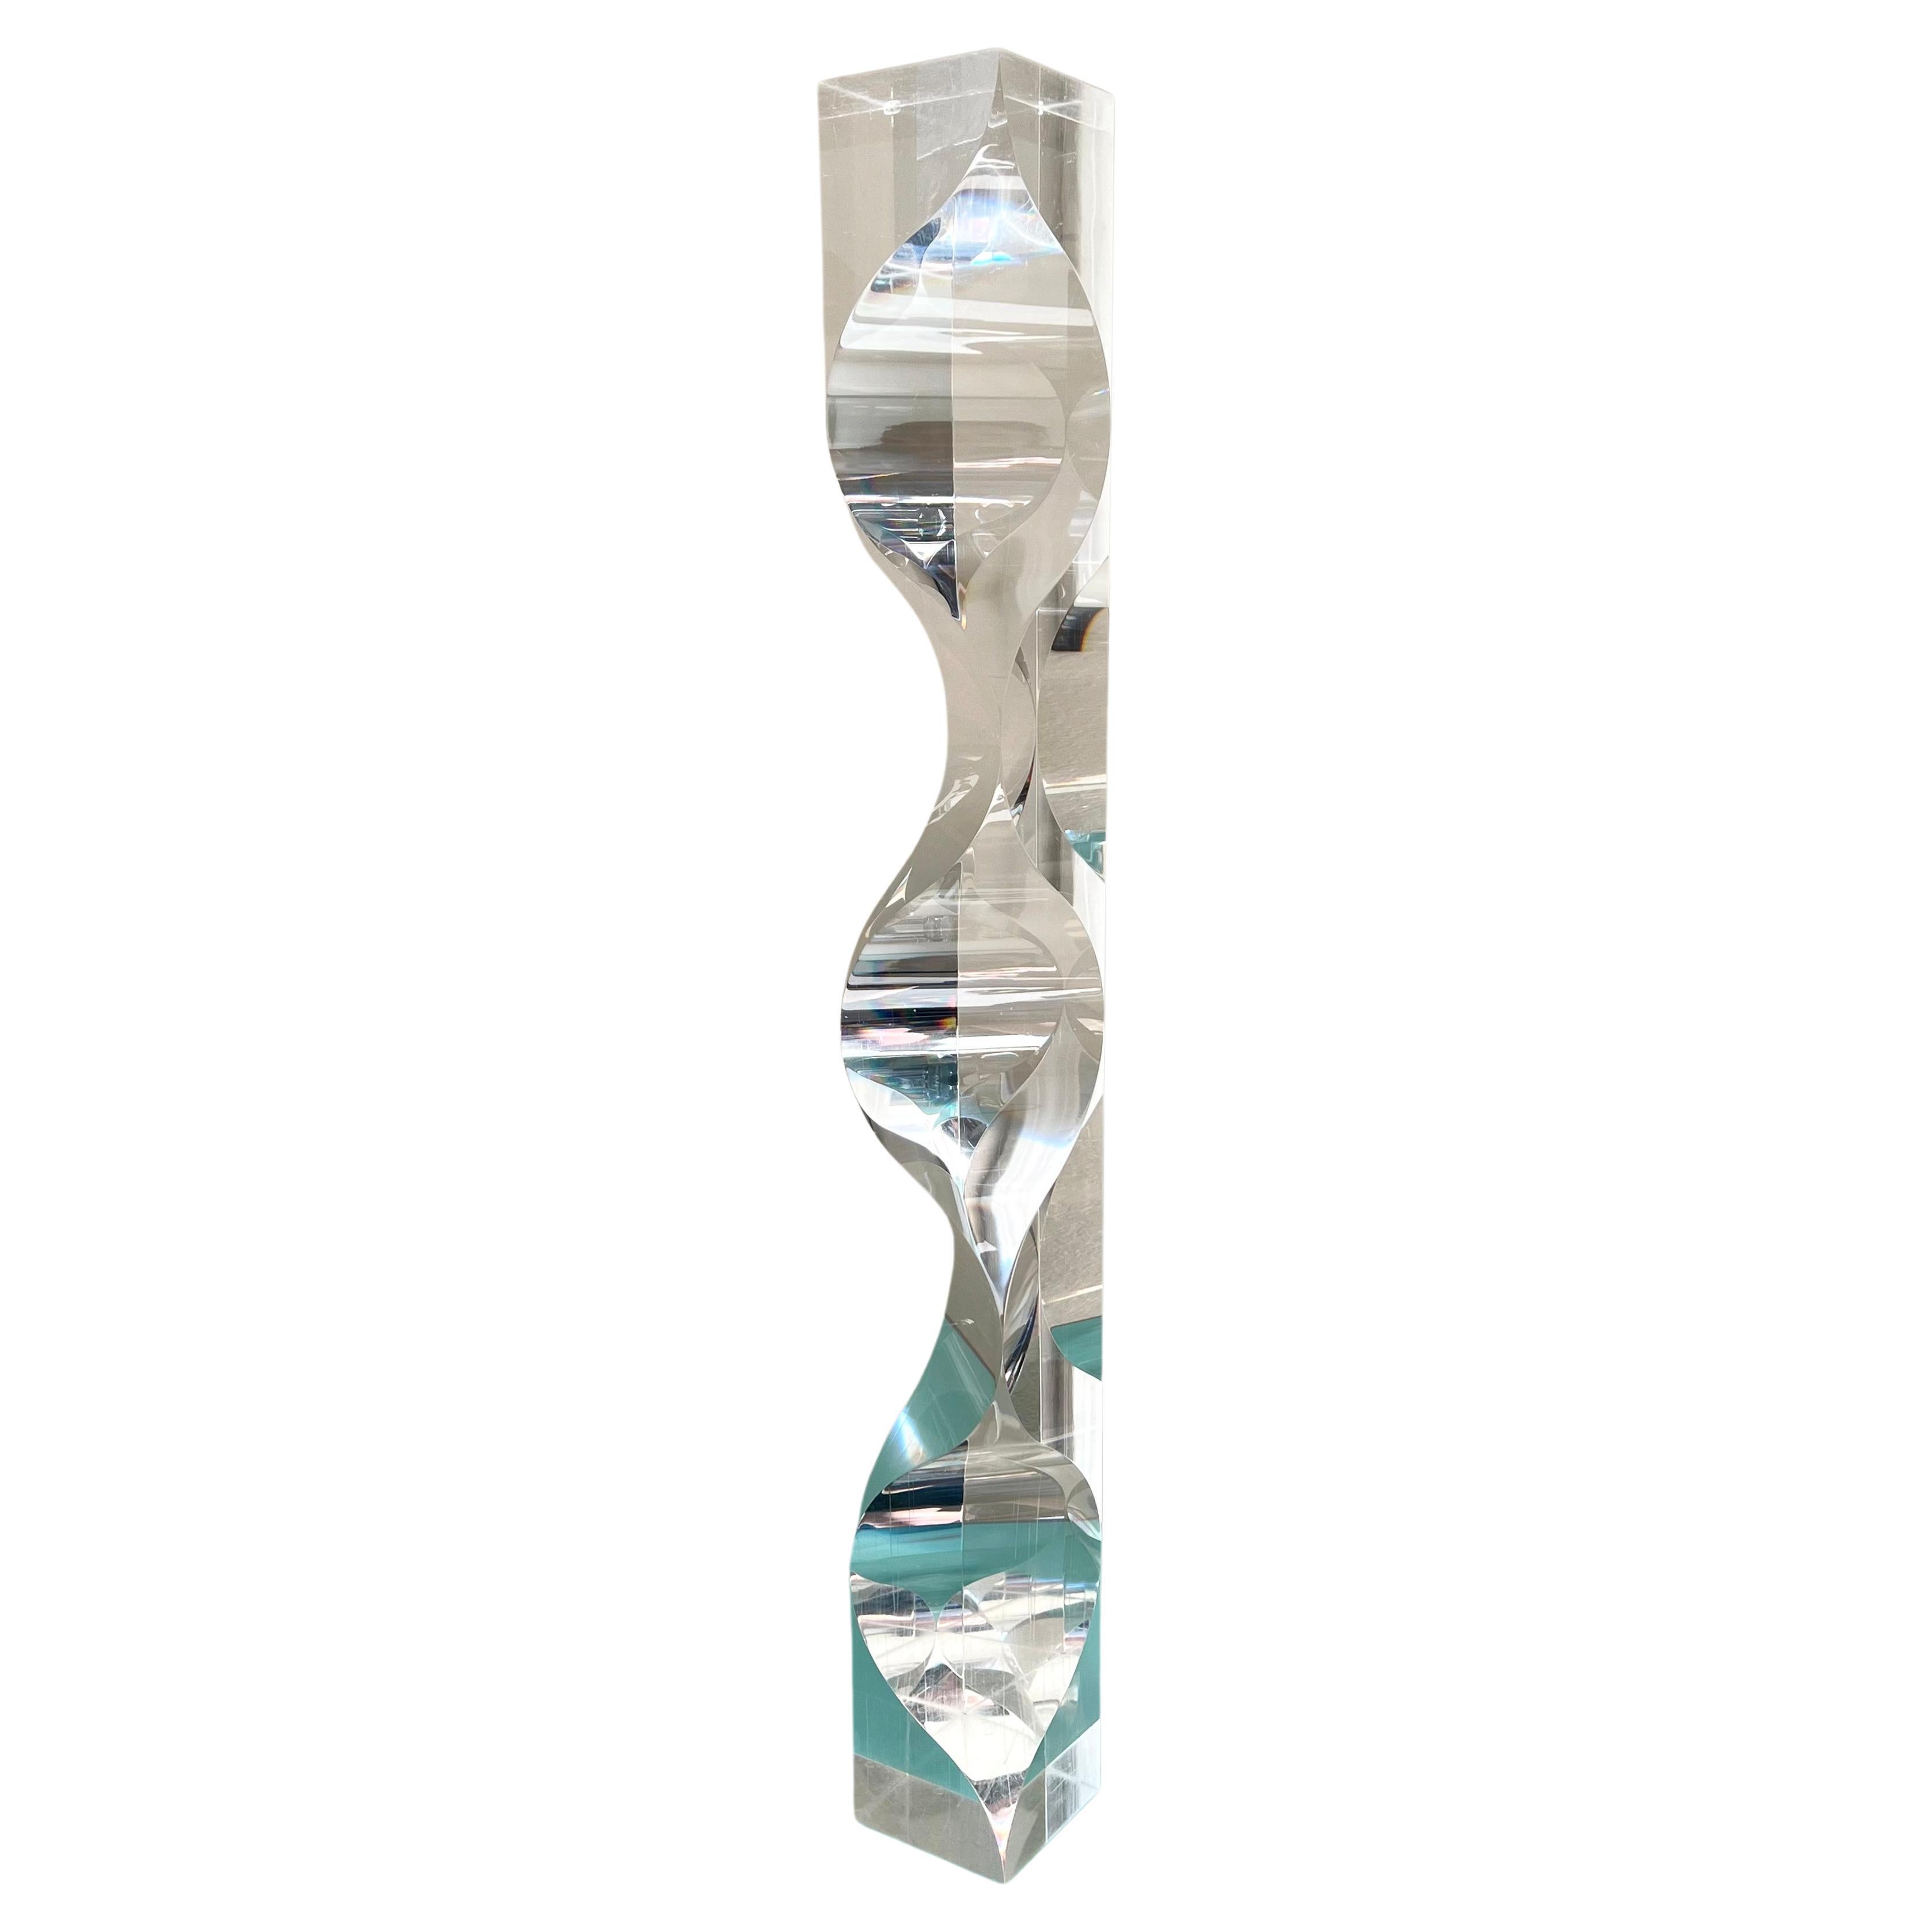 Alessio Tasca for Fusina Acrylic Lucite Prism Tower Sculpture